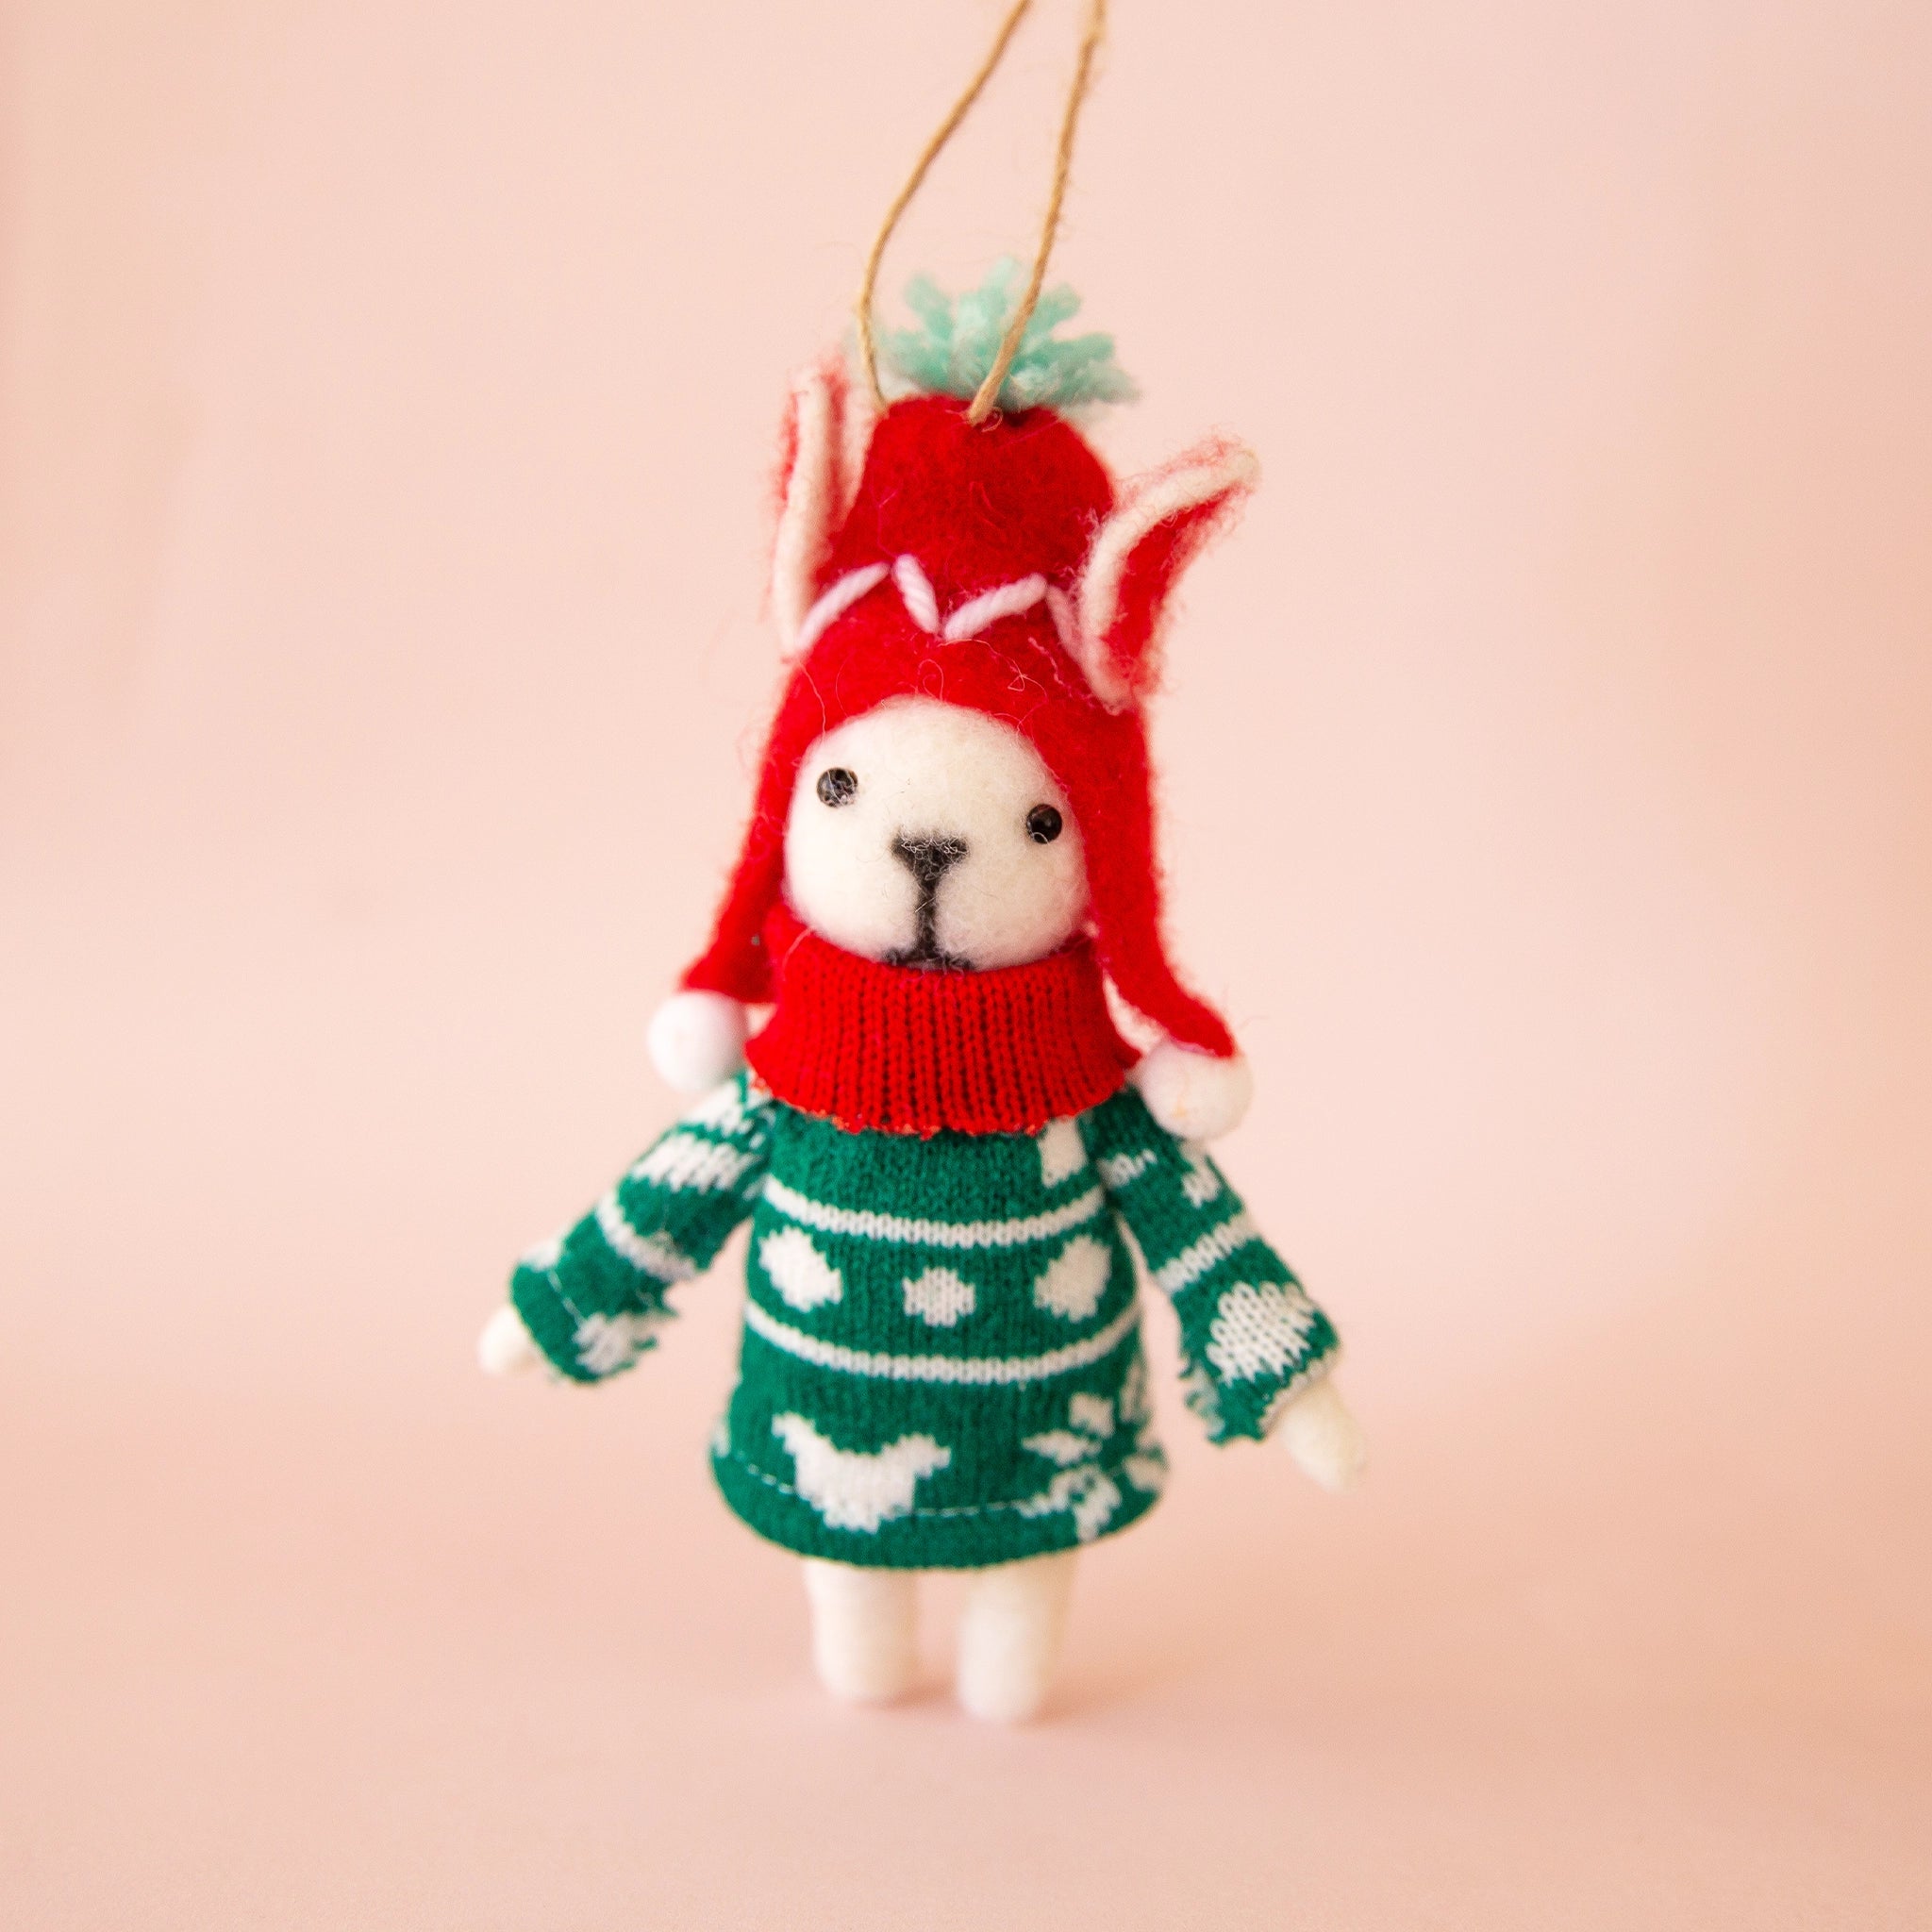 On a peachy background is a white felt dog ornament with a green sweater and red hat on. 